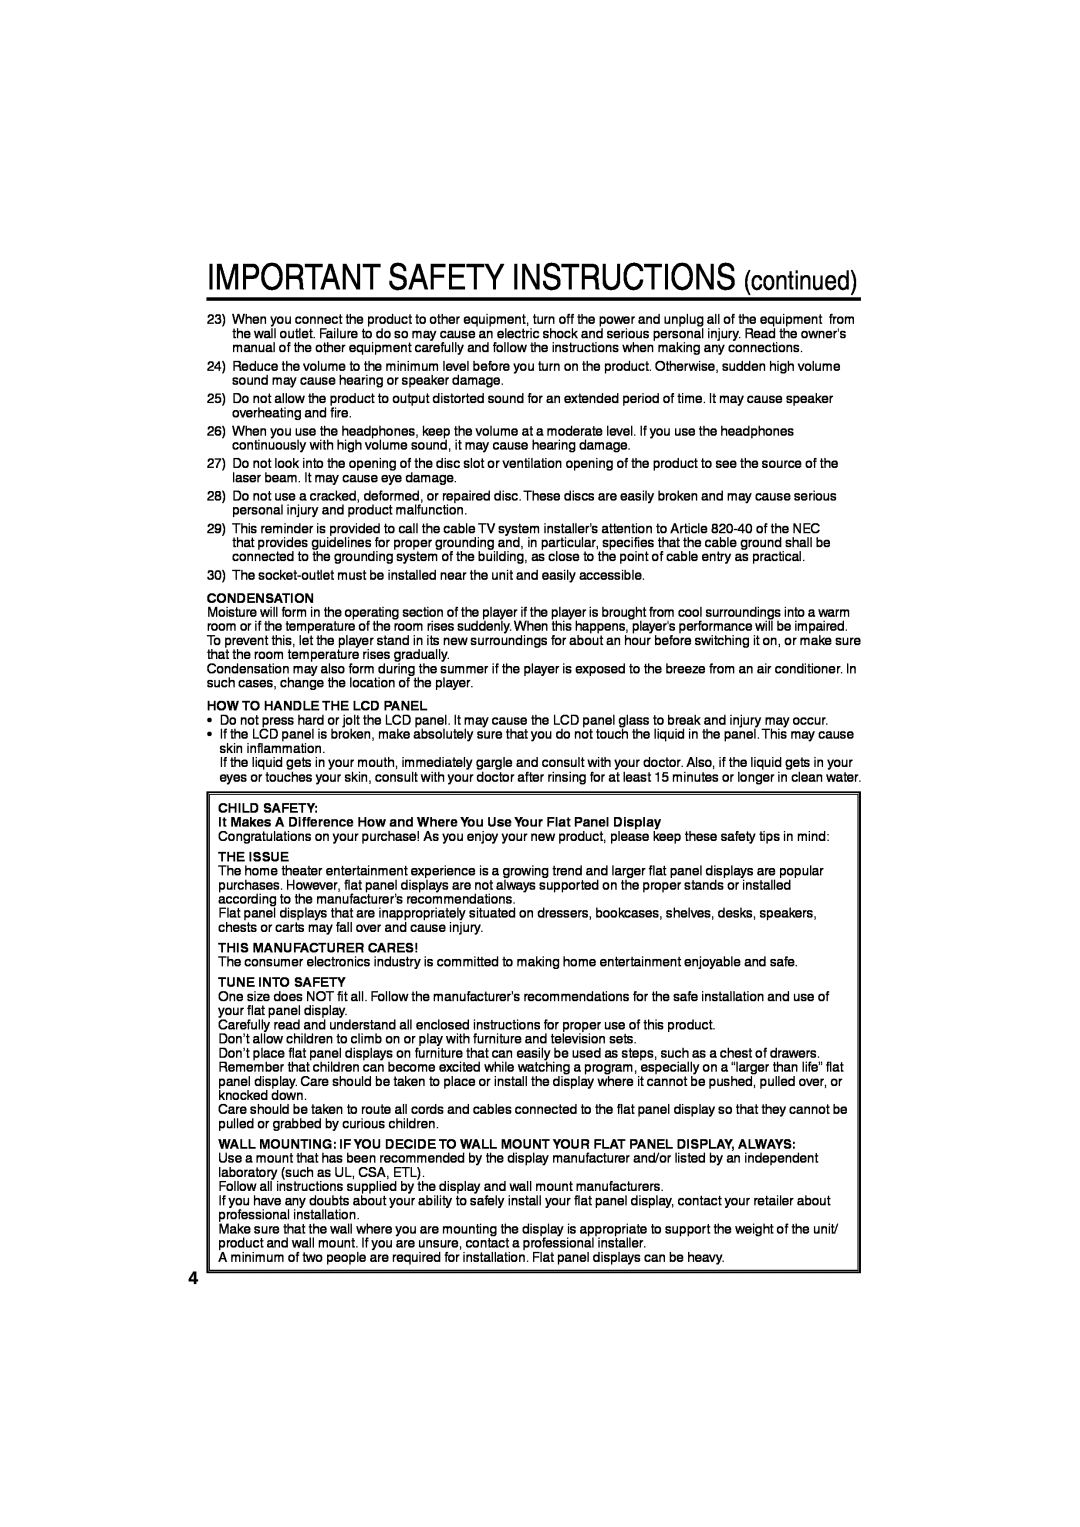 Sansui HDLCDVD265 IMPORTANT SAFETY INSTRUCTIONS continued, Condensation, How To Handle The Lcd Panel, Child Safety 